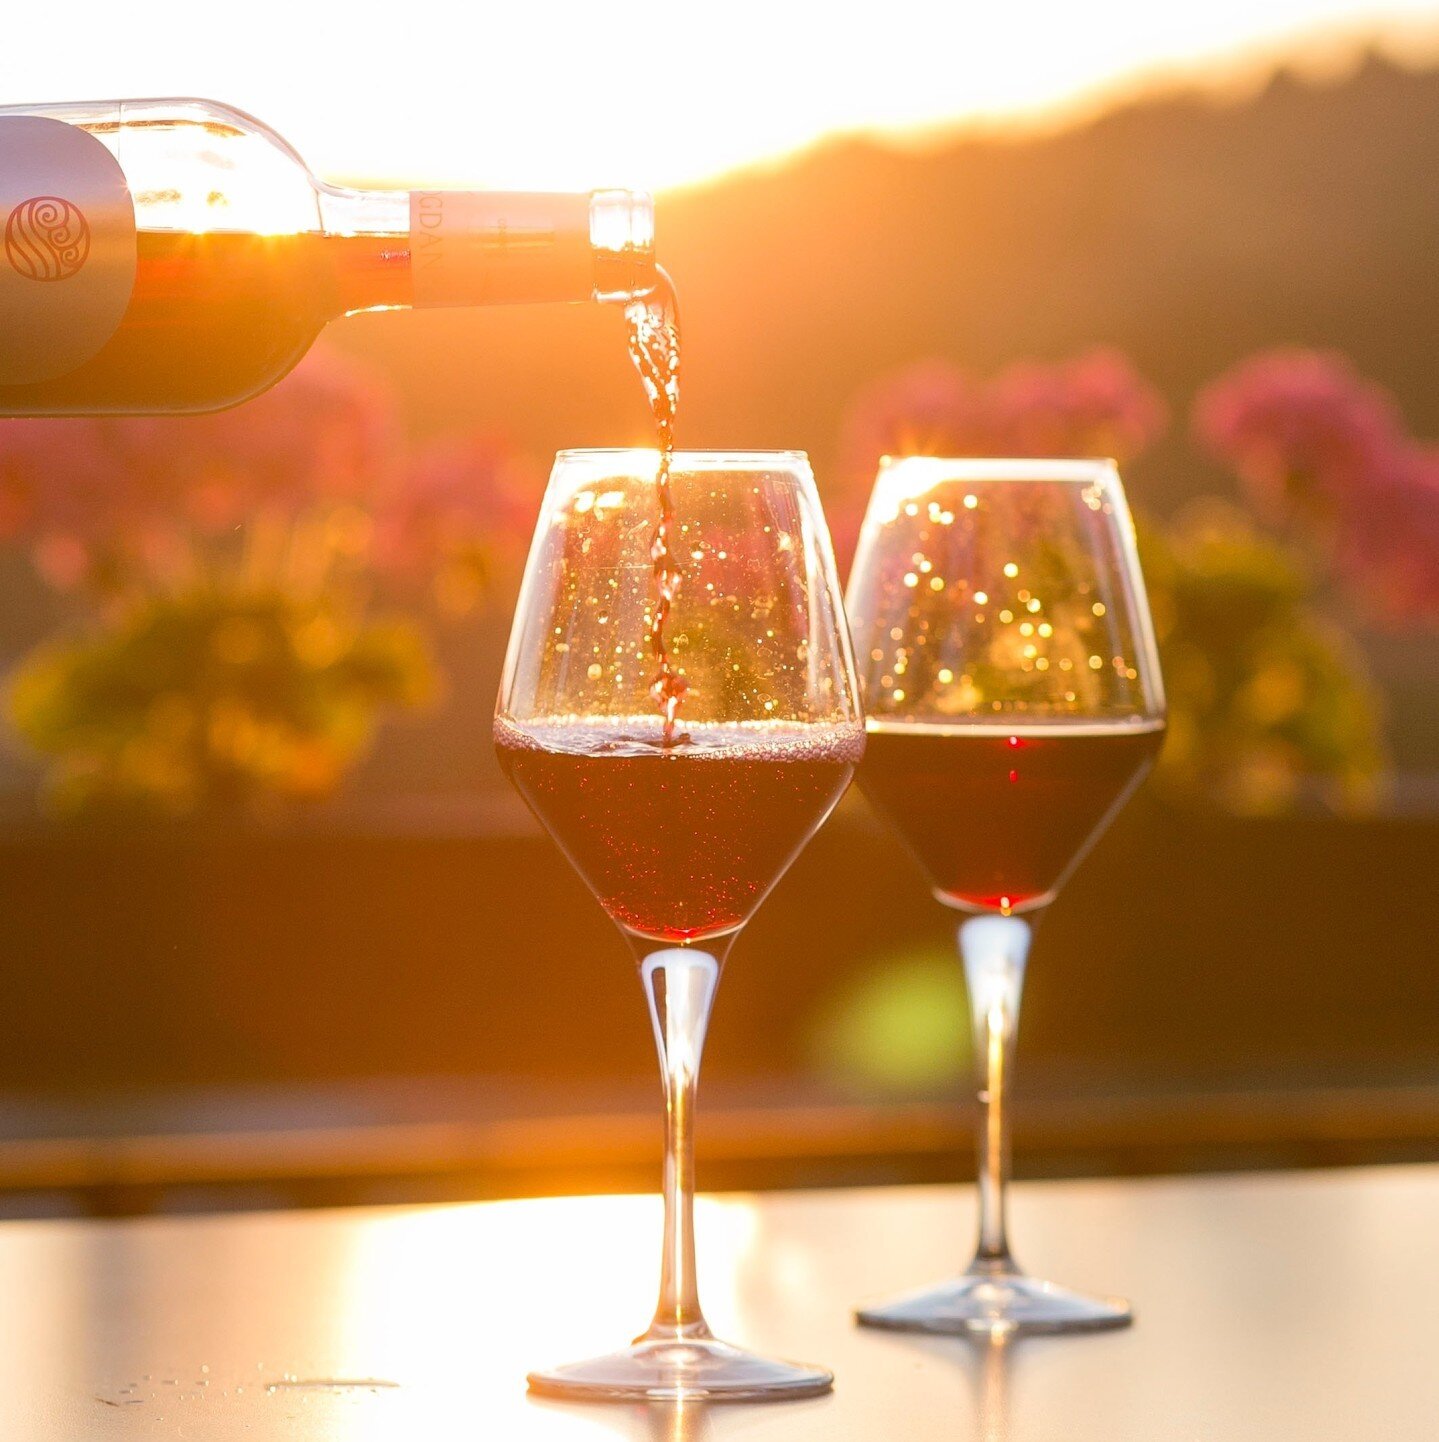 We love a great view with a glass of Shiraz at the end of the day.⁠
⁠
⁠
#sunvalleywineco #shiraz #winetime #redwine #australianwine